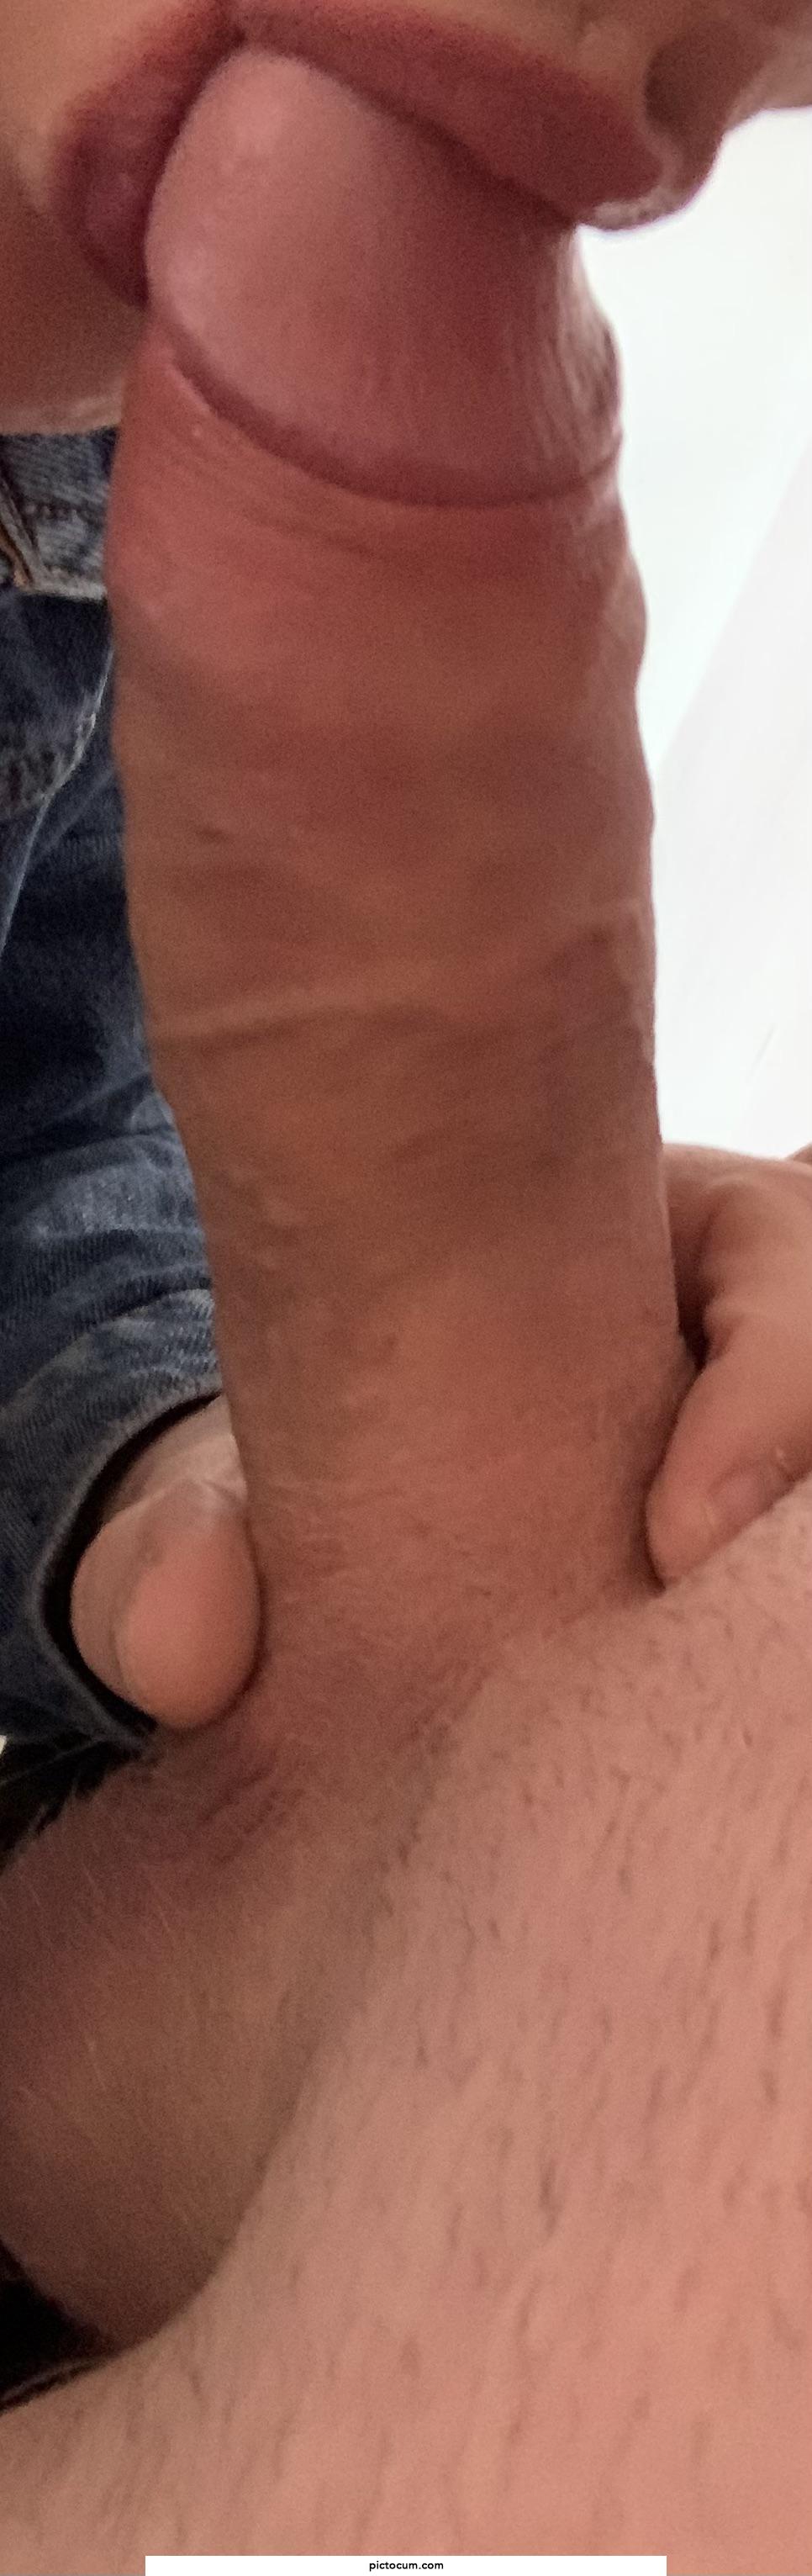 Sucking my favourite married cock!